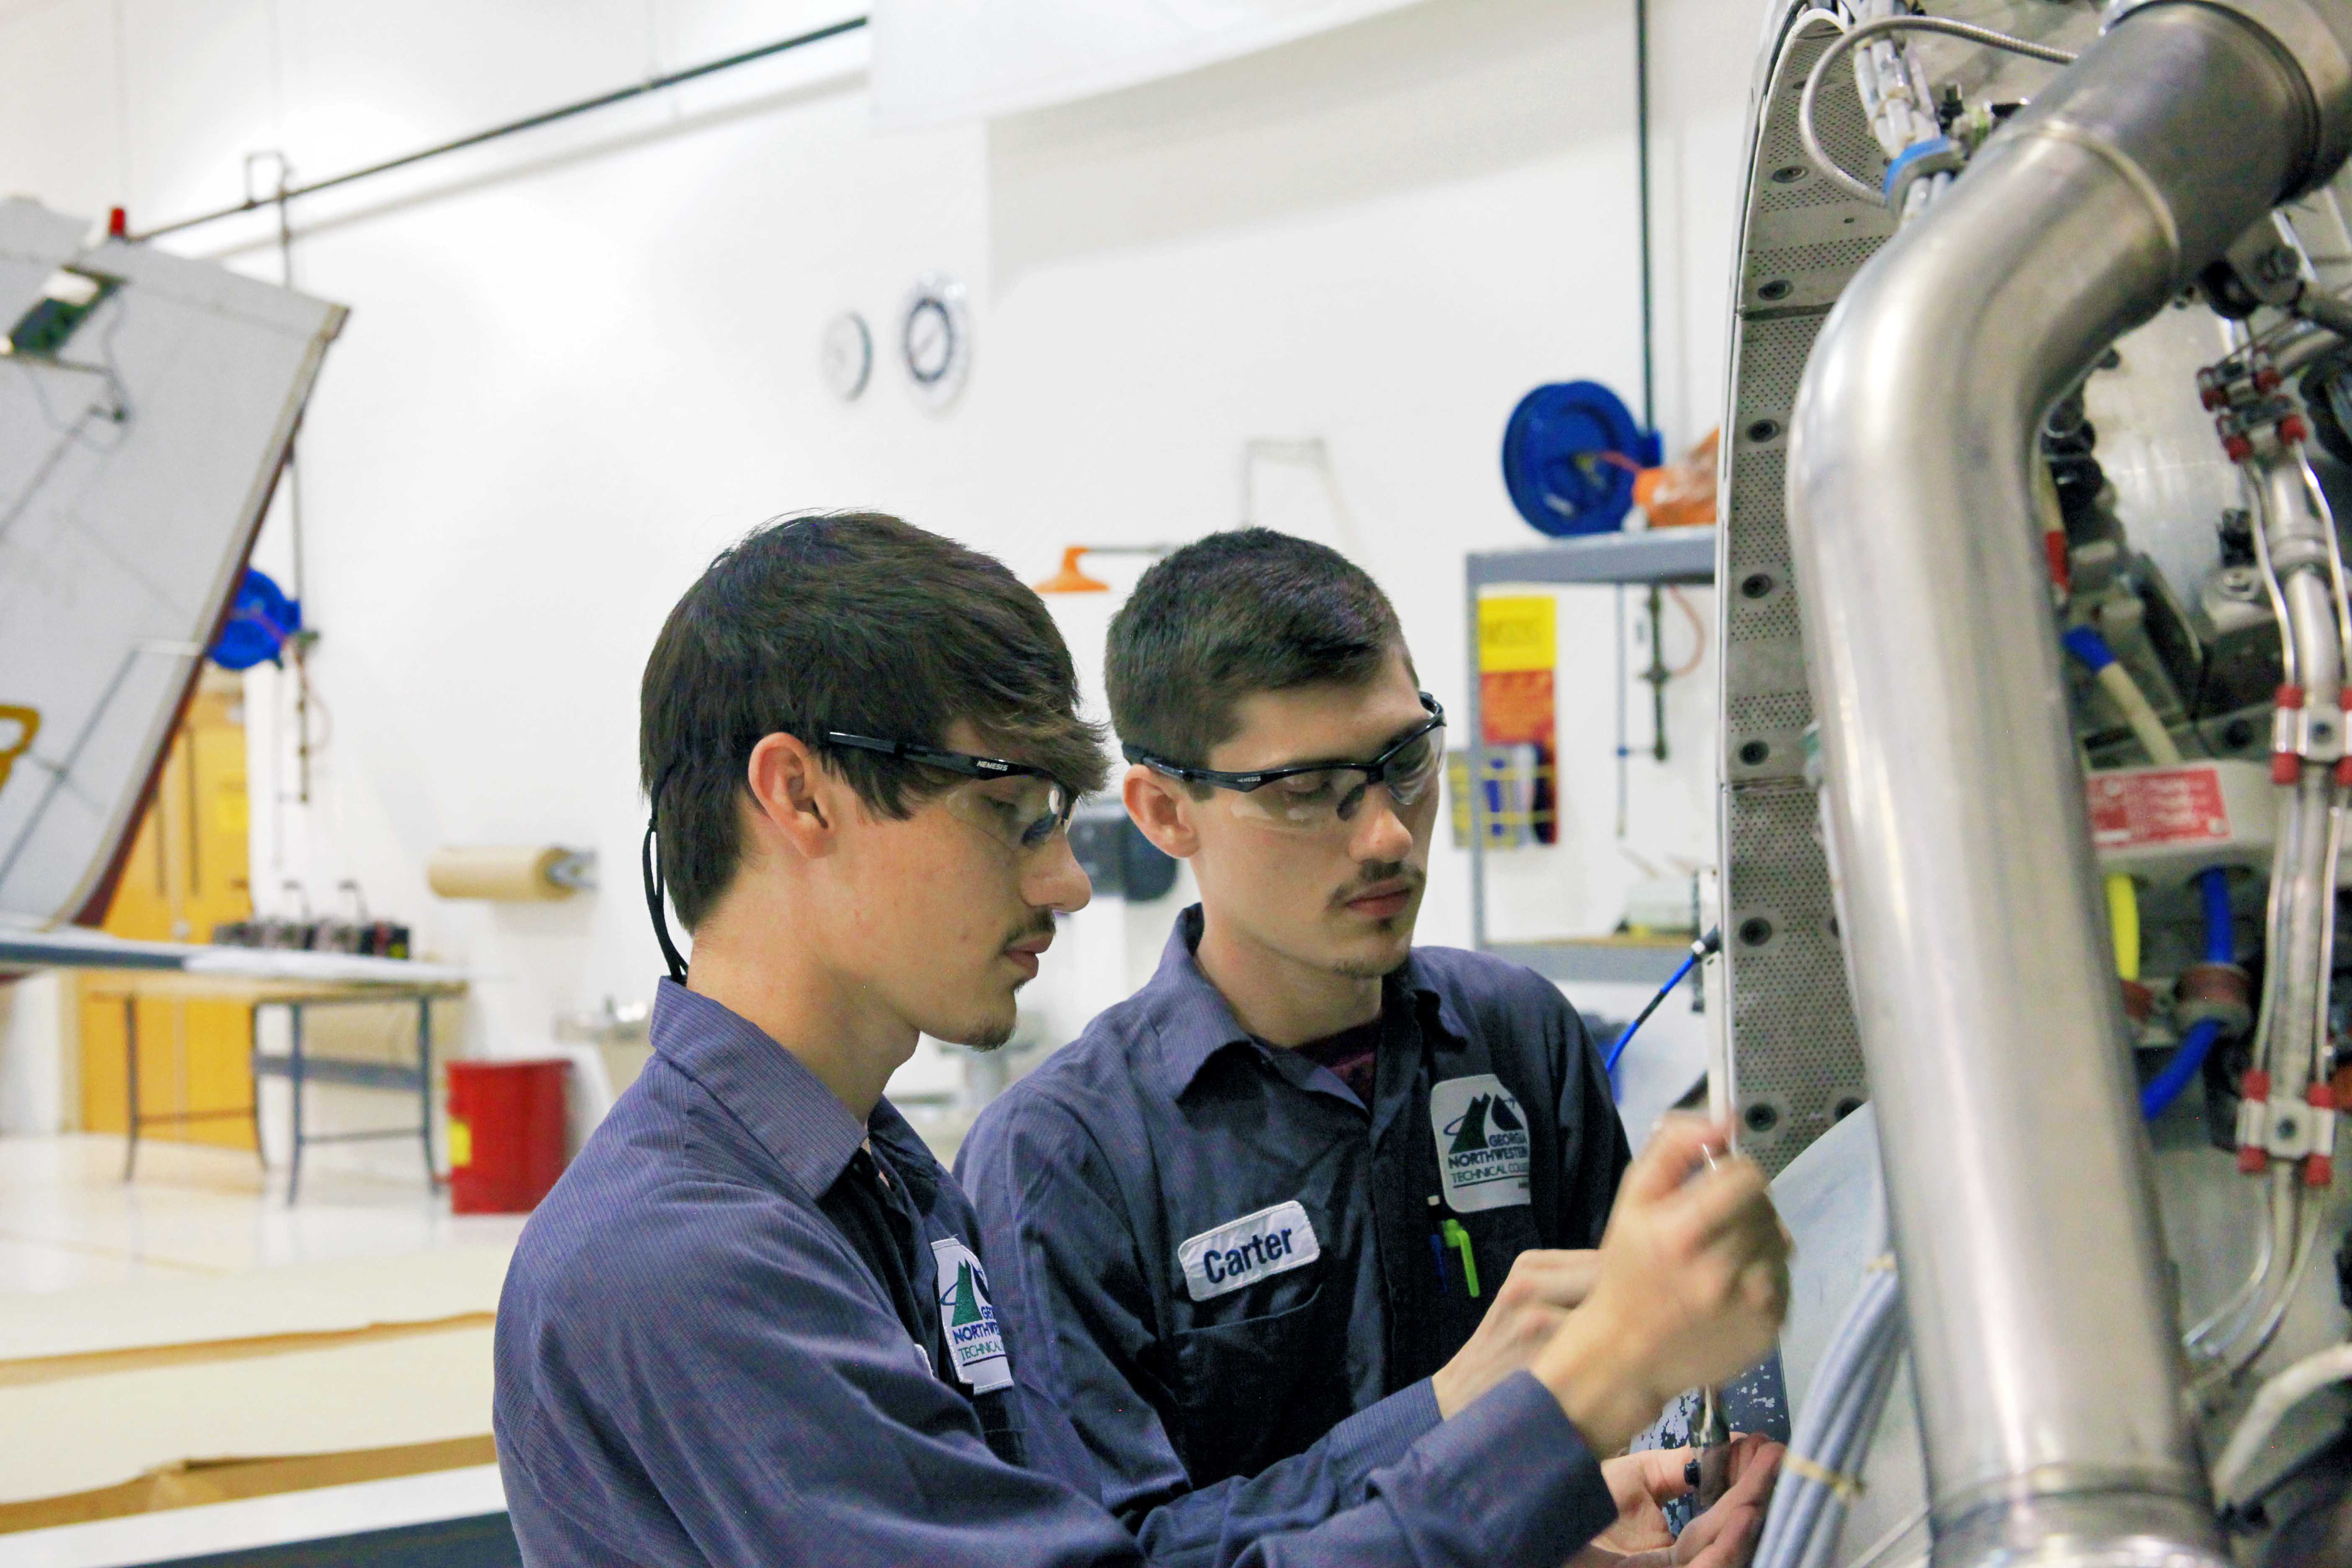 Cade (left) and Carter Shelton carefully disassembled the blades of a turbine engine at GNTC’s Aviation Training Center. The identical twins are now graduates of GNTC’s Aviation Maintenance Technology program and are fully certified through the FAA to work on aircraft of all sizes. 